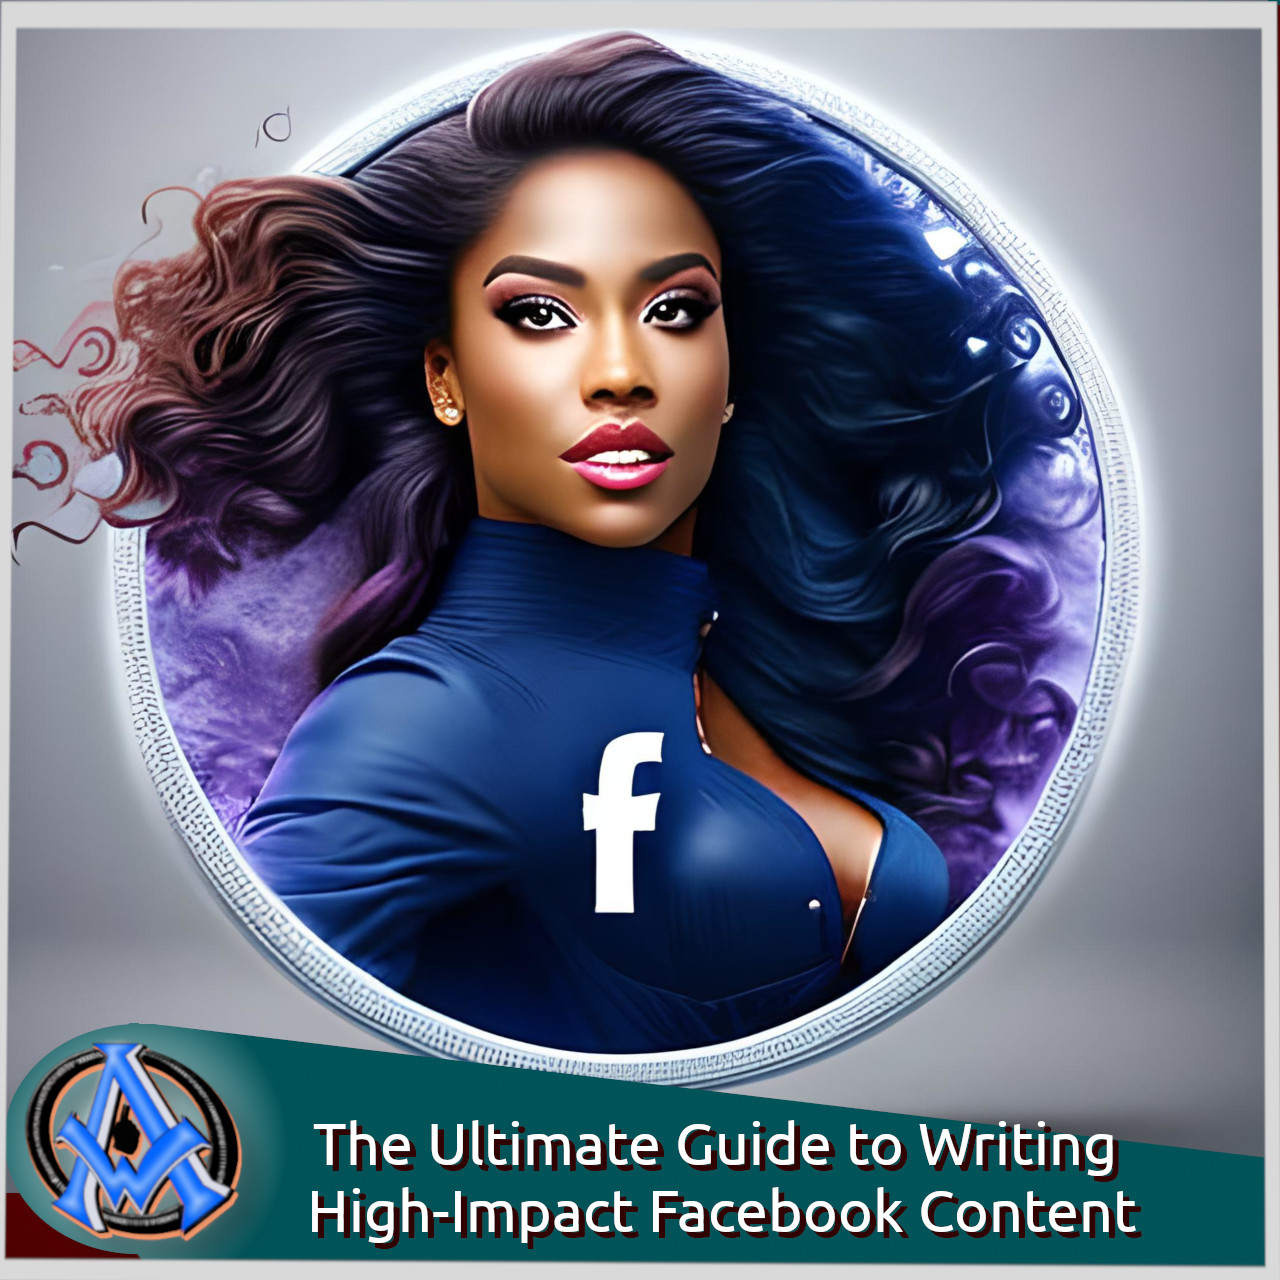 The Ultimate Guide to Writing High-Impact Facebook Content